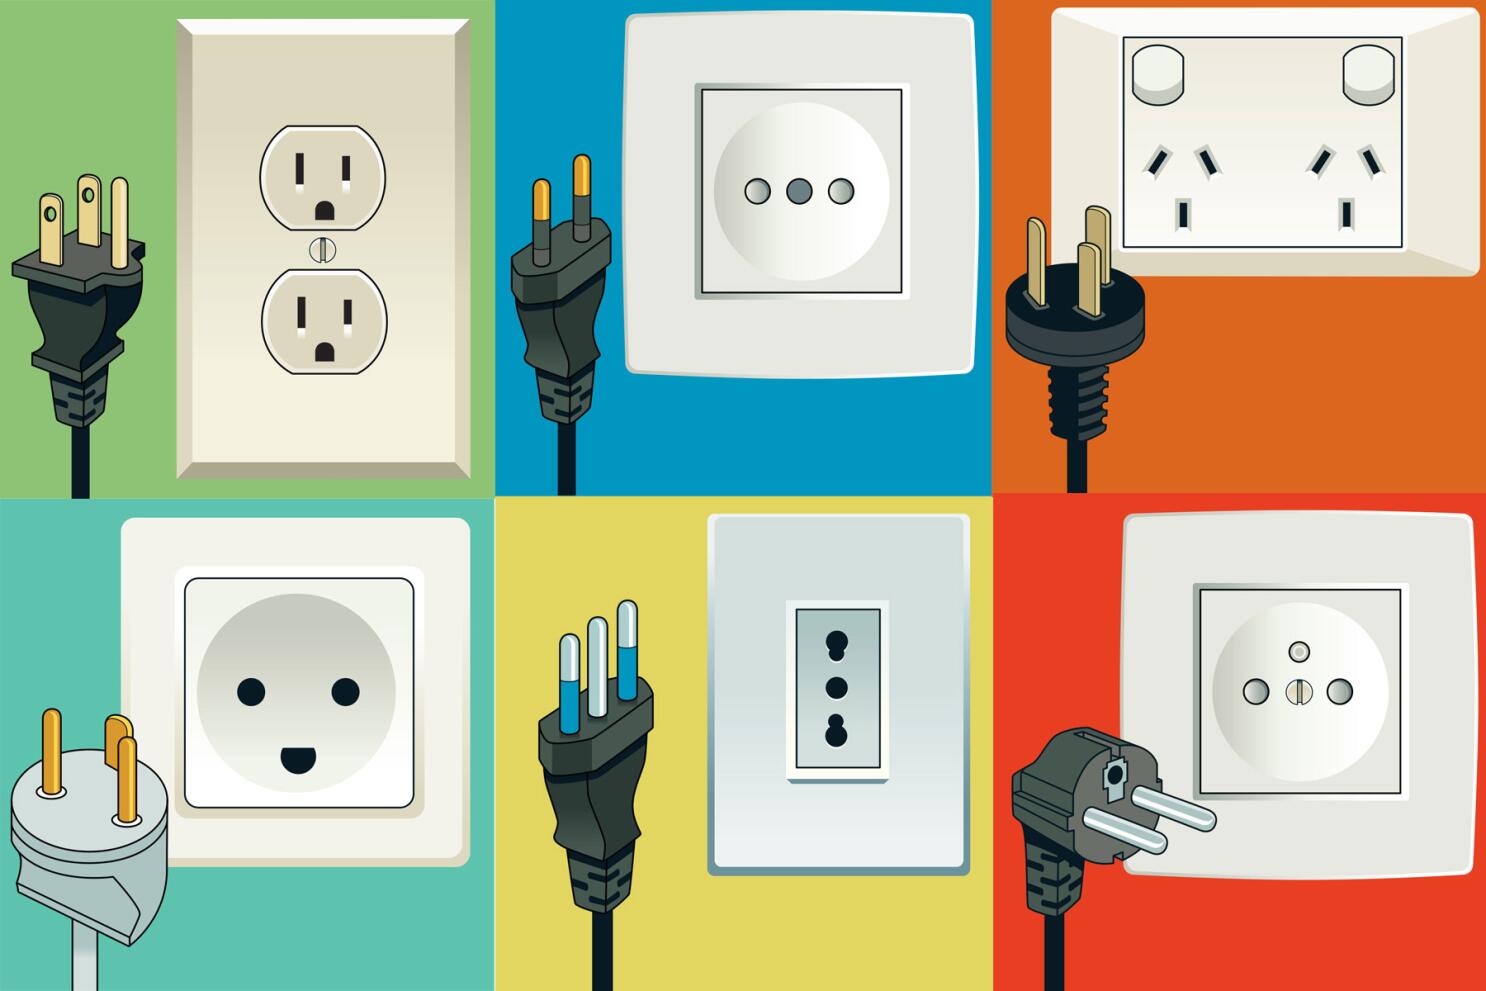 North American & Japanese Electric Plug Difference